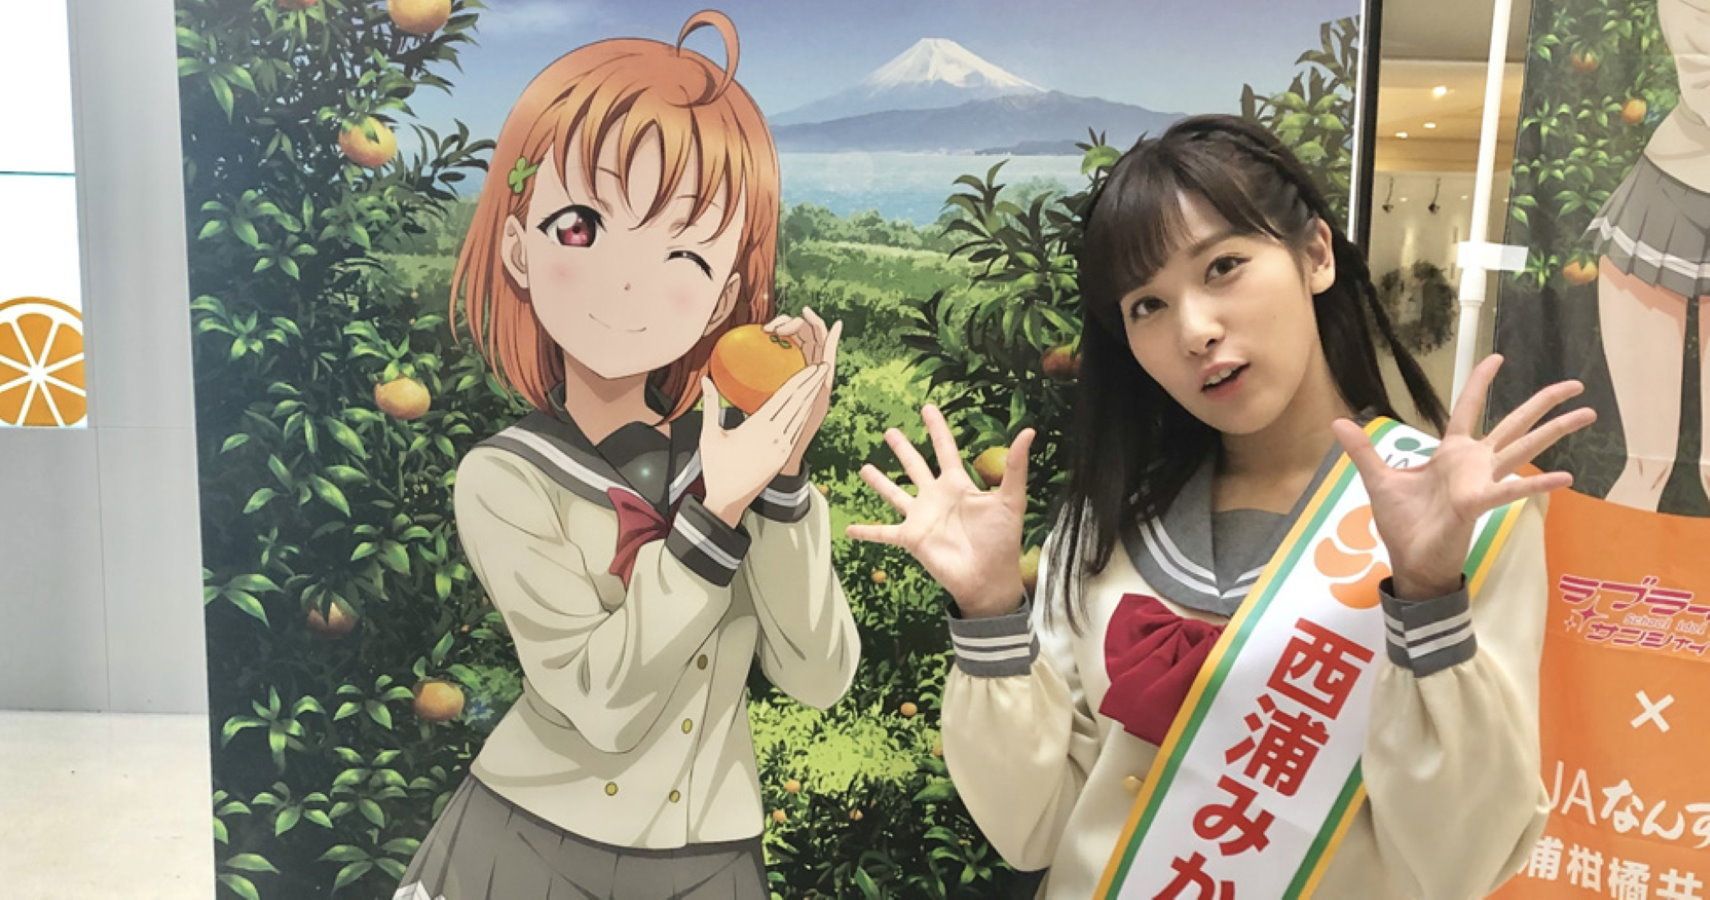 Love Live! Advertisement Taken Down Due To Sexual Drawing Of Minor